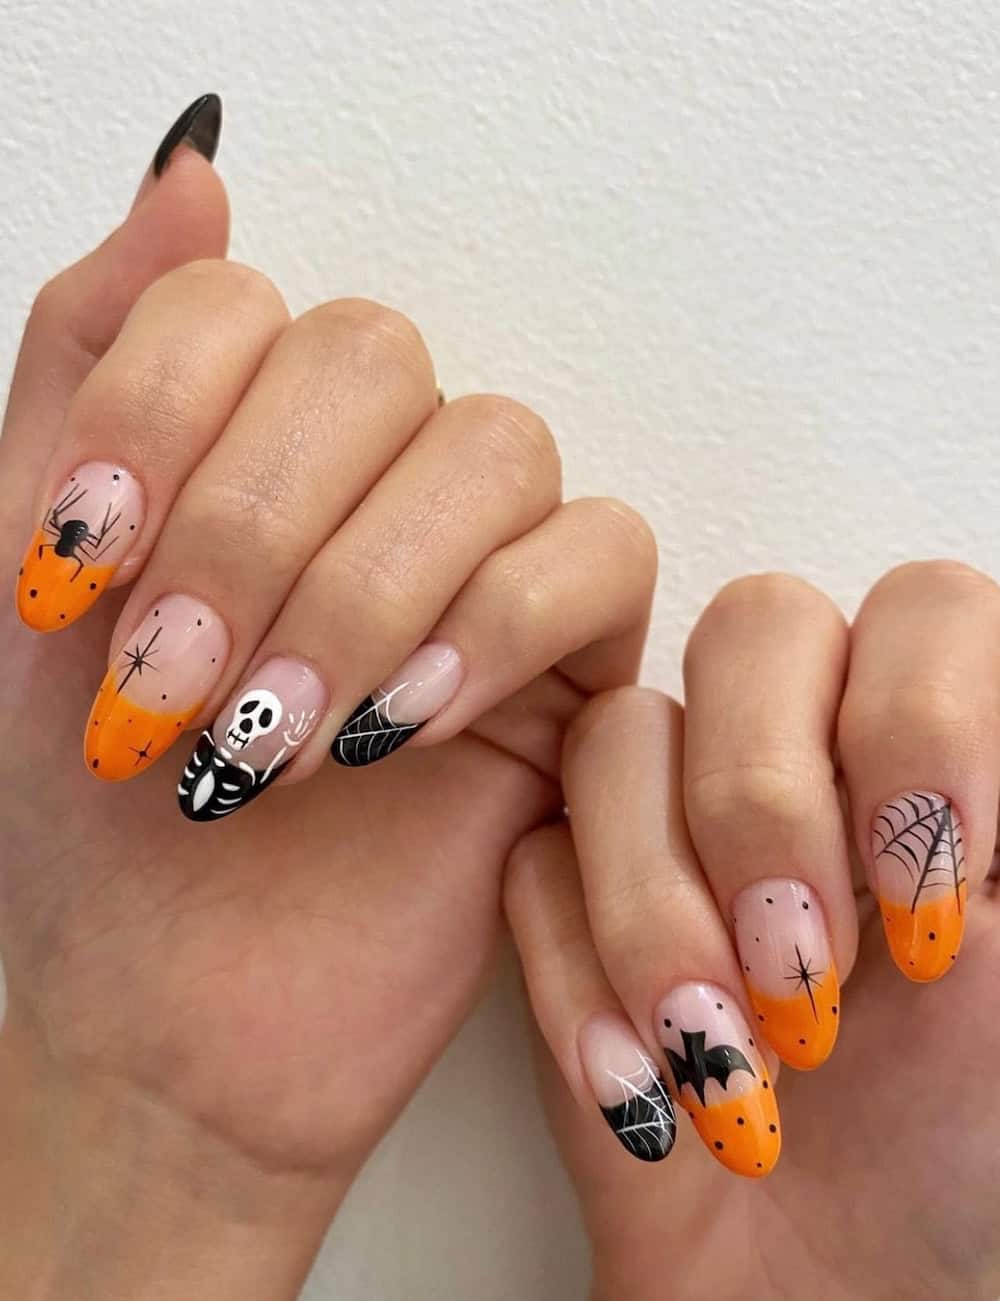 long nude almond nails with black and orange tips and Halloween nail art featuring skeletons, spiders, and bats